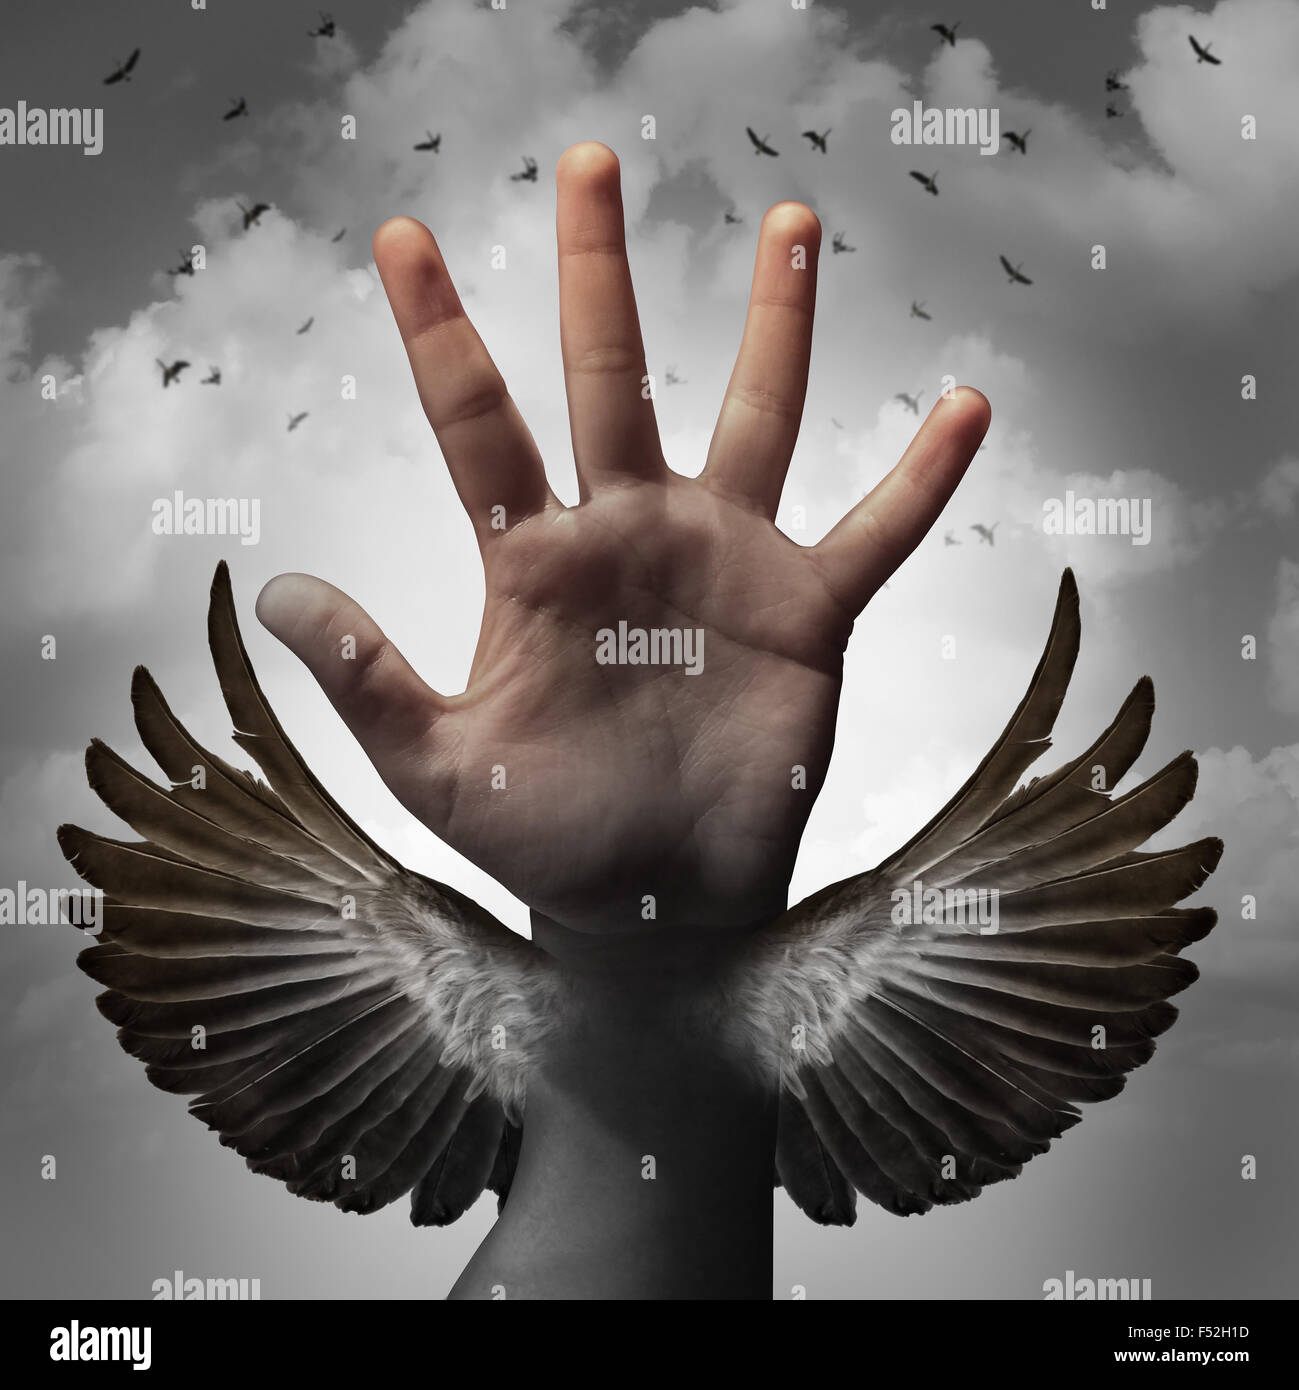 Build self confidence concept and believing in inner potential as a human hand transforming into a bird wing as a metaphor for learning and career education to gain freedom through education. Stock Photo